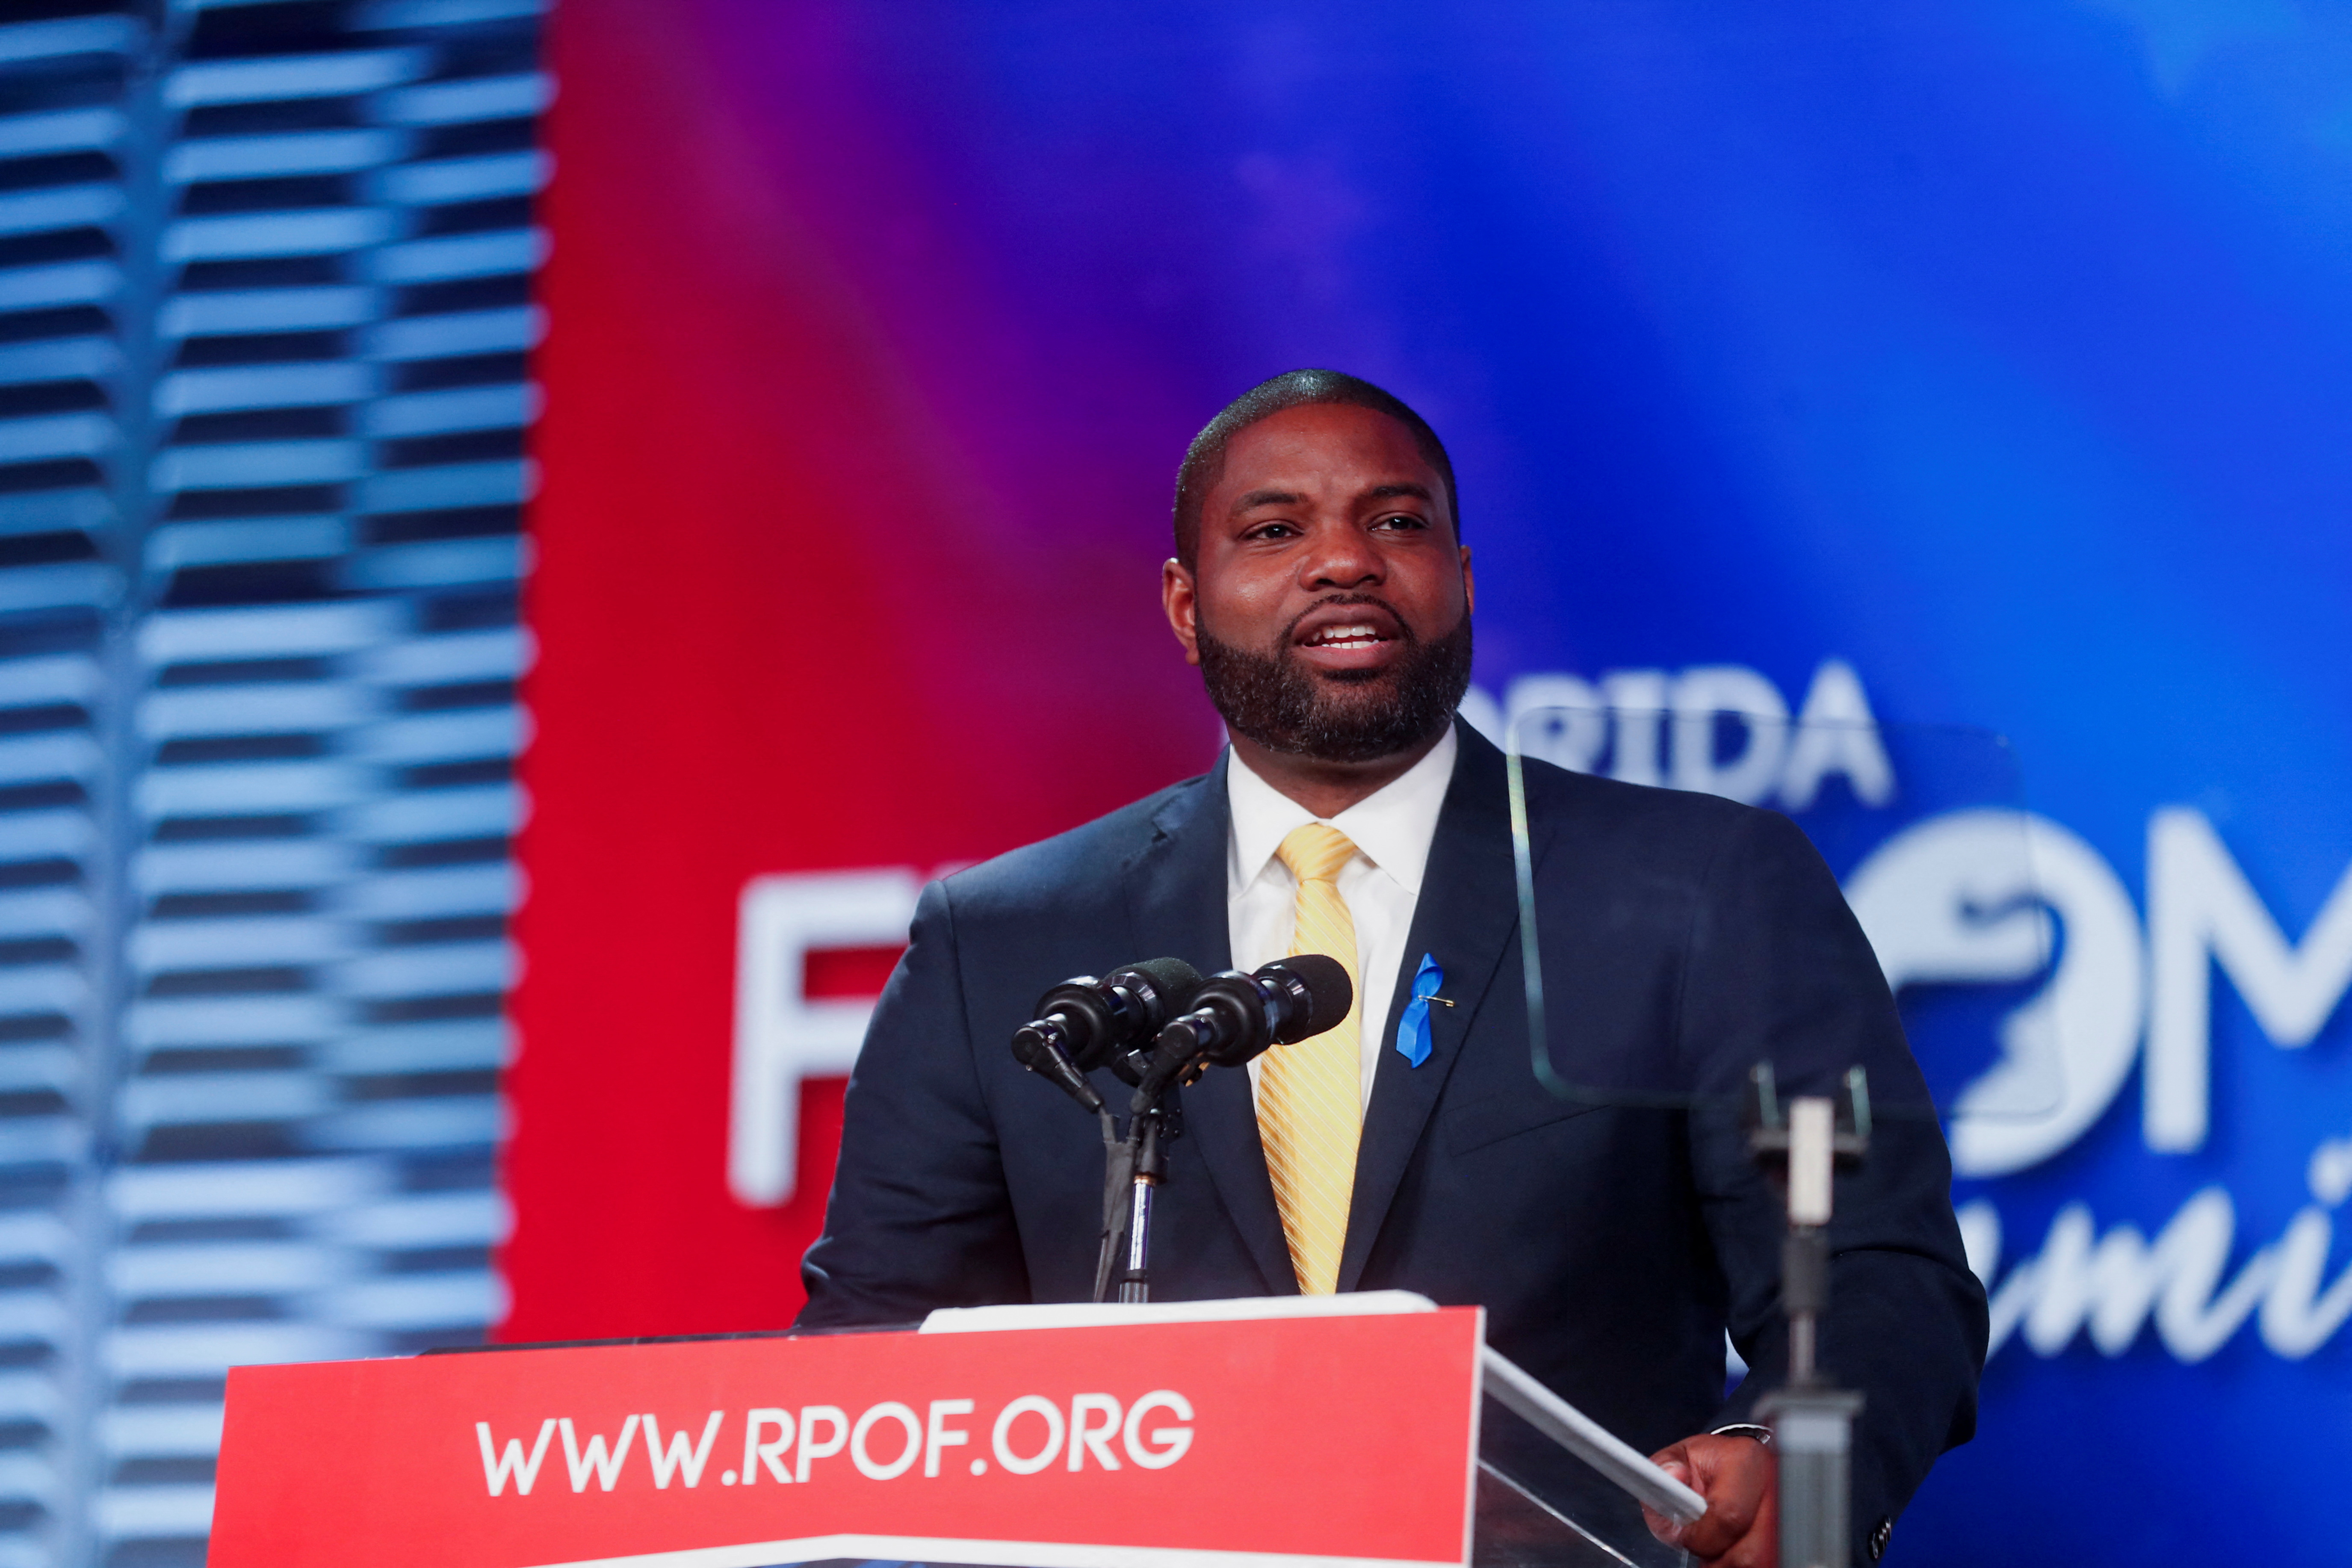 Rep. Byron Donalds explains why he said things about Jim Crow